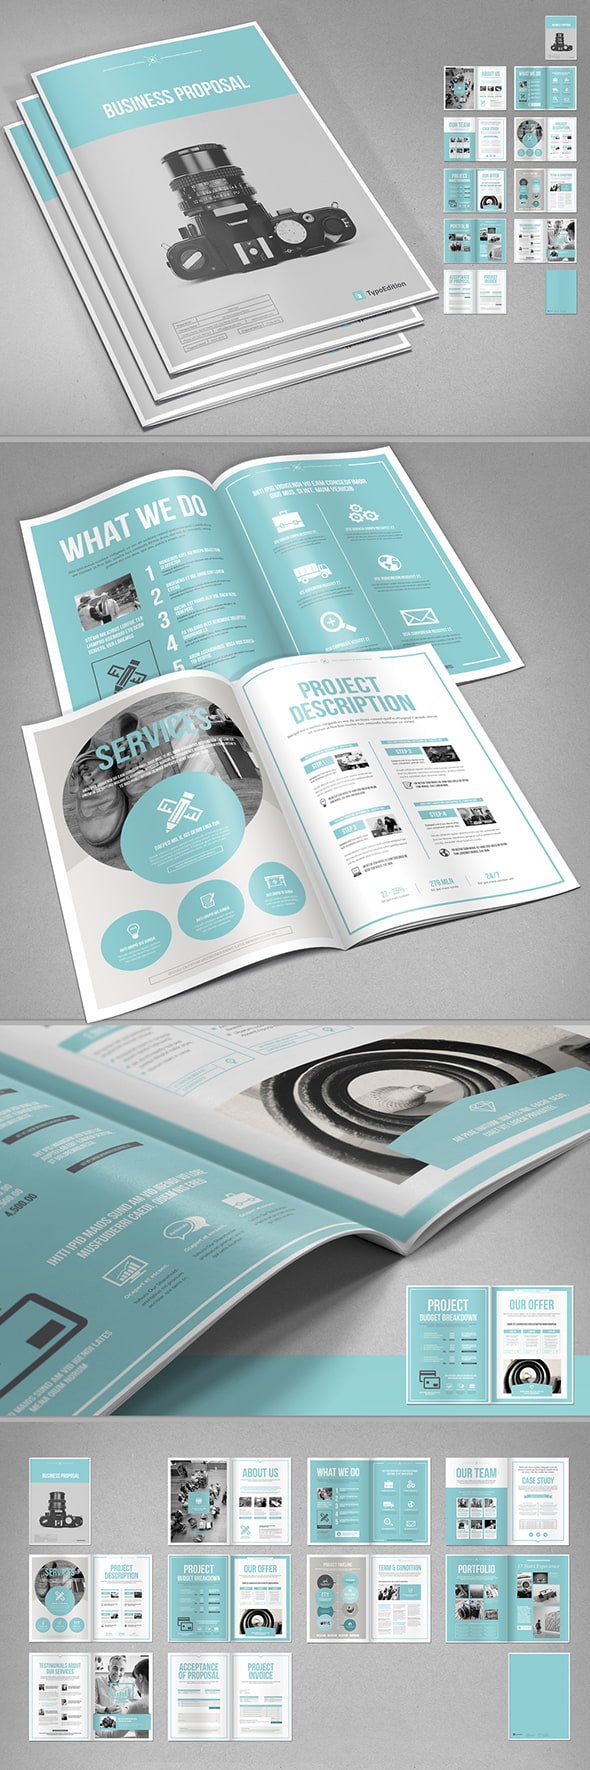 AdobeStock - Business Proposal Layout with Blue Accents - 224619279